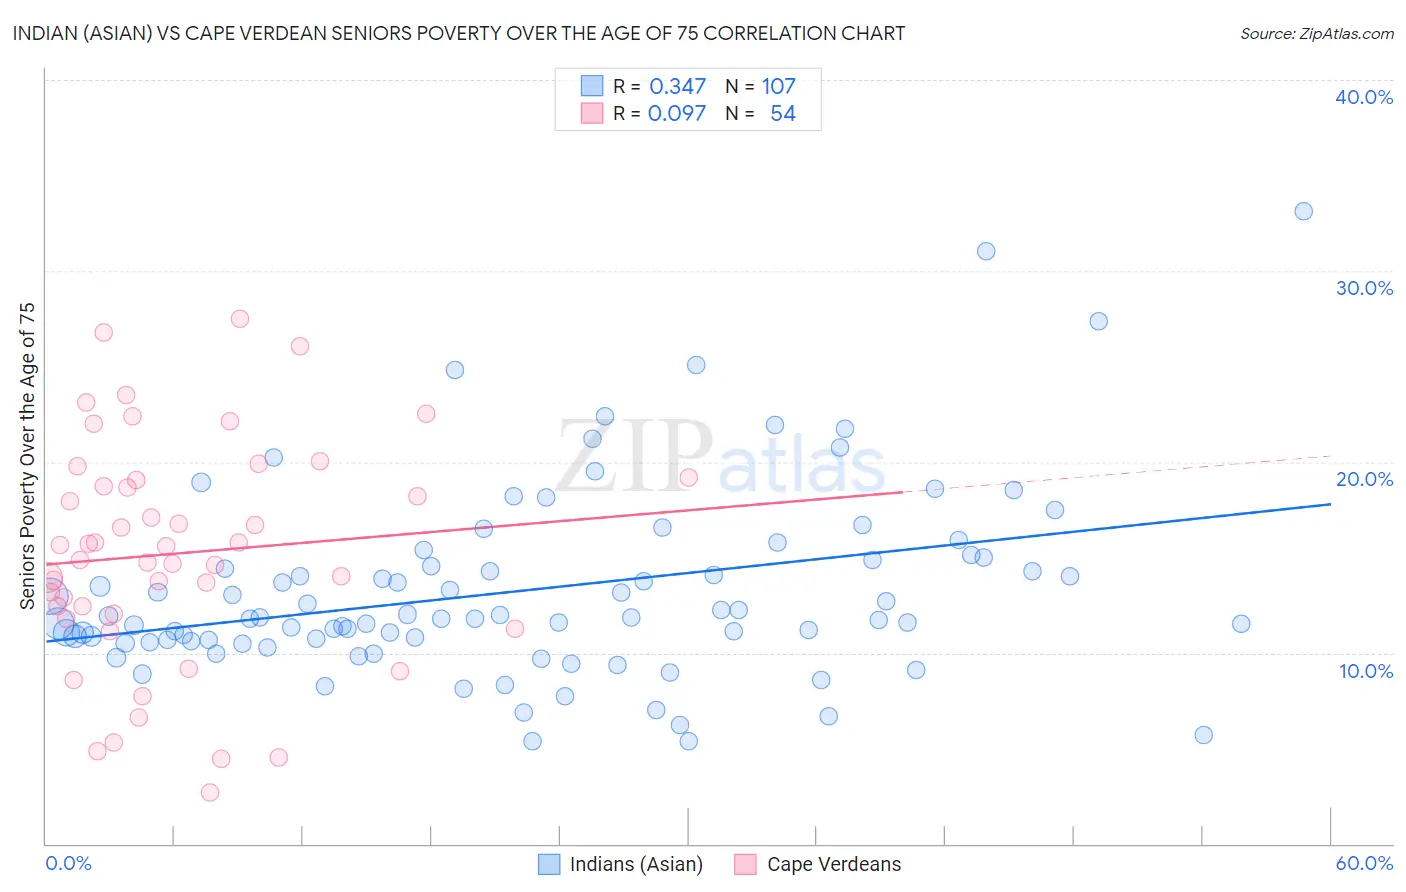 Indian (Asian) vs Cape Verdean Seniors Poverty Over the Age of 75